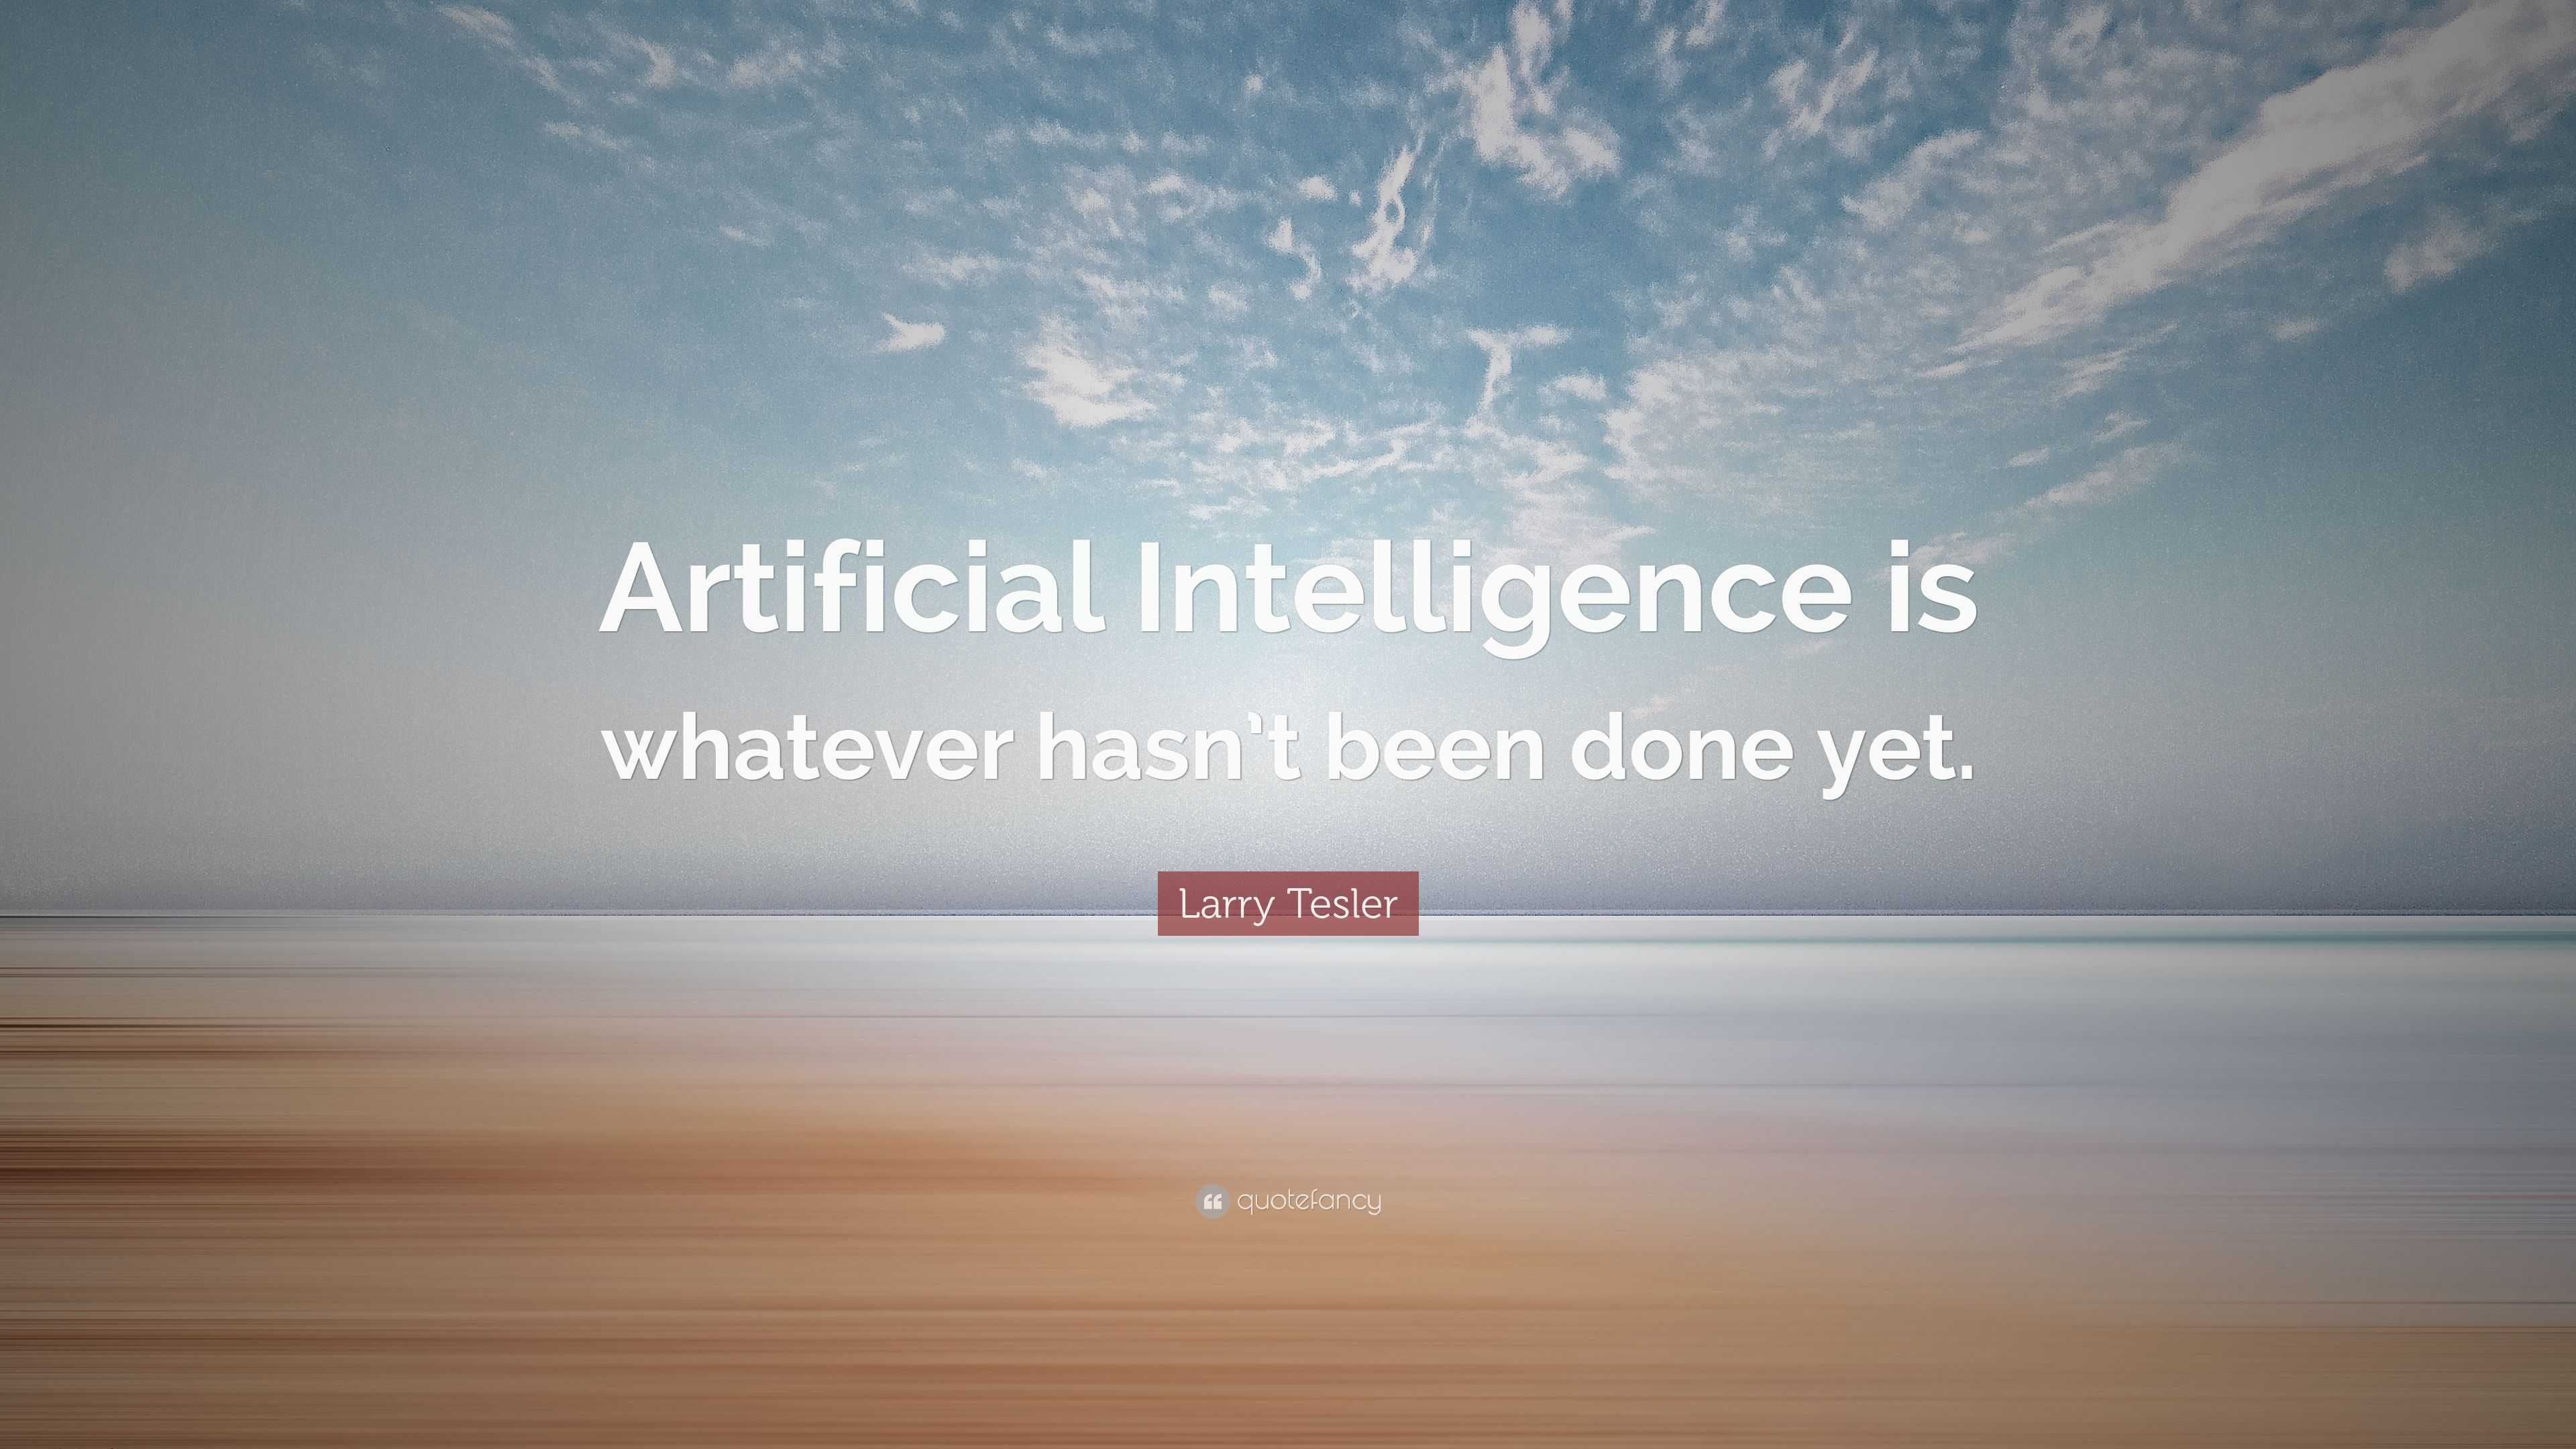 Larry Tesler Quote: “Artificial Intelligence is whatever hasn’t been ...